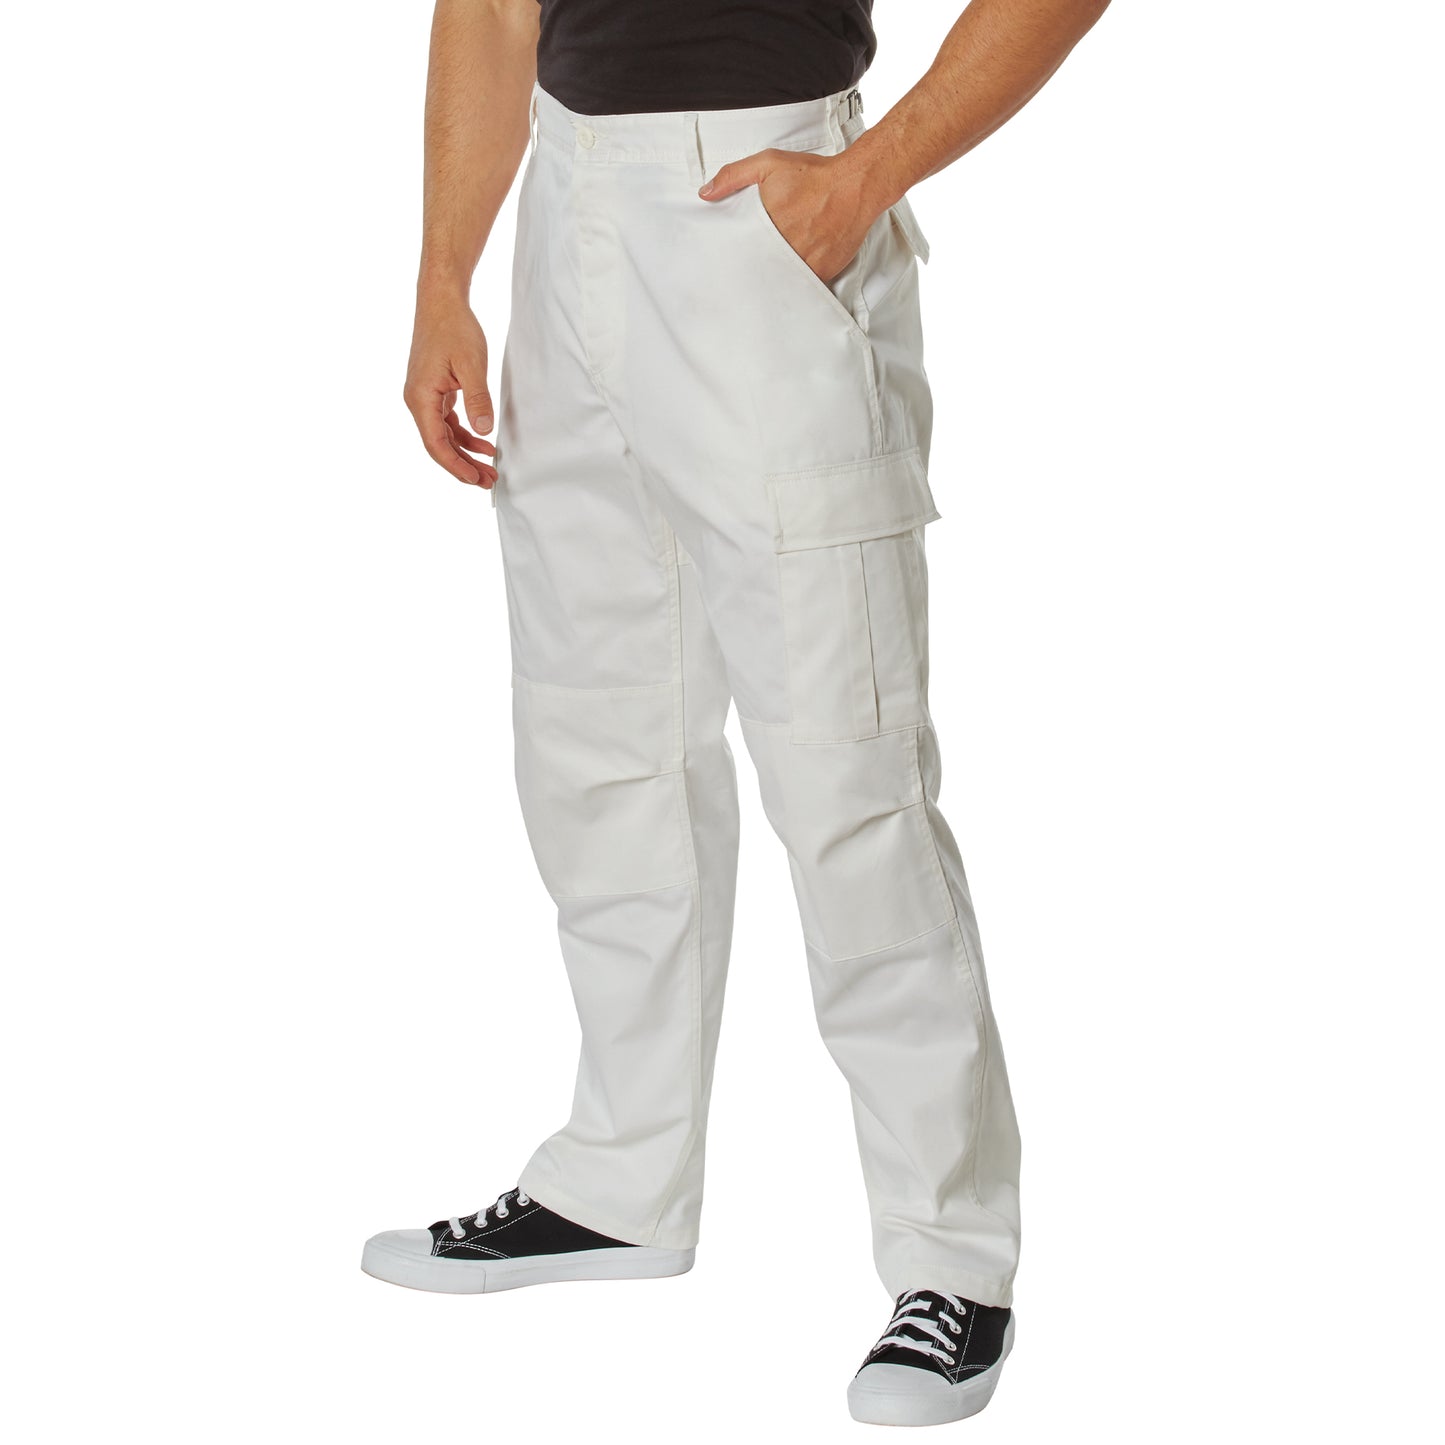 Rothco Tactical BDU Cargo Pants - Off White